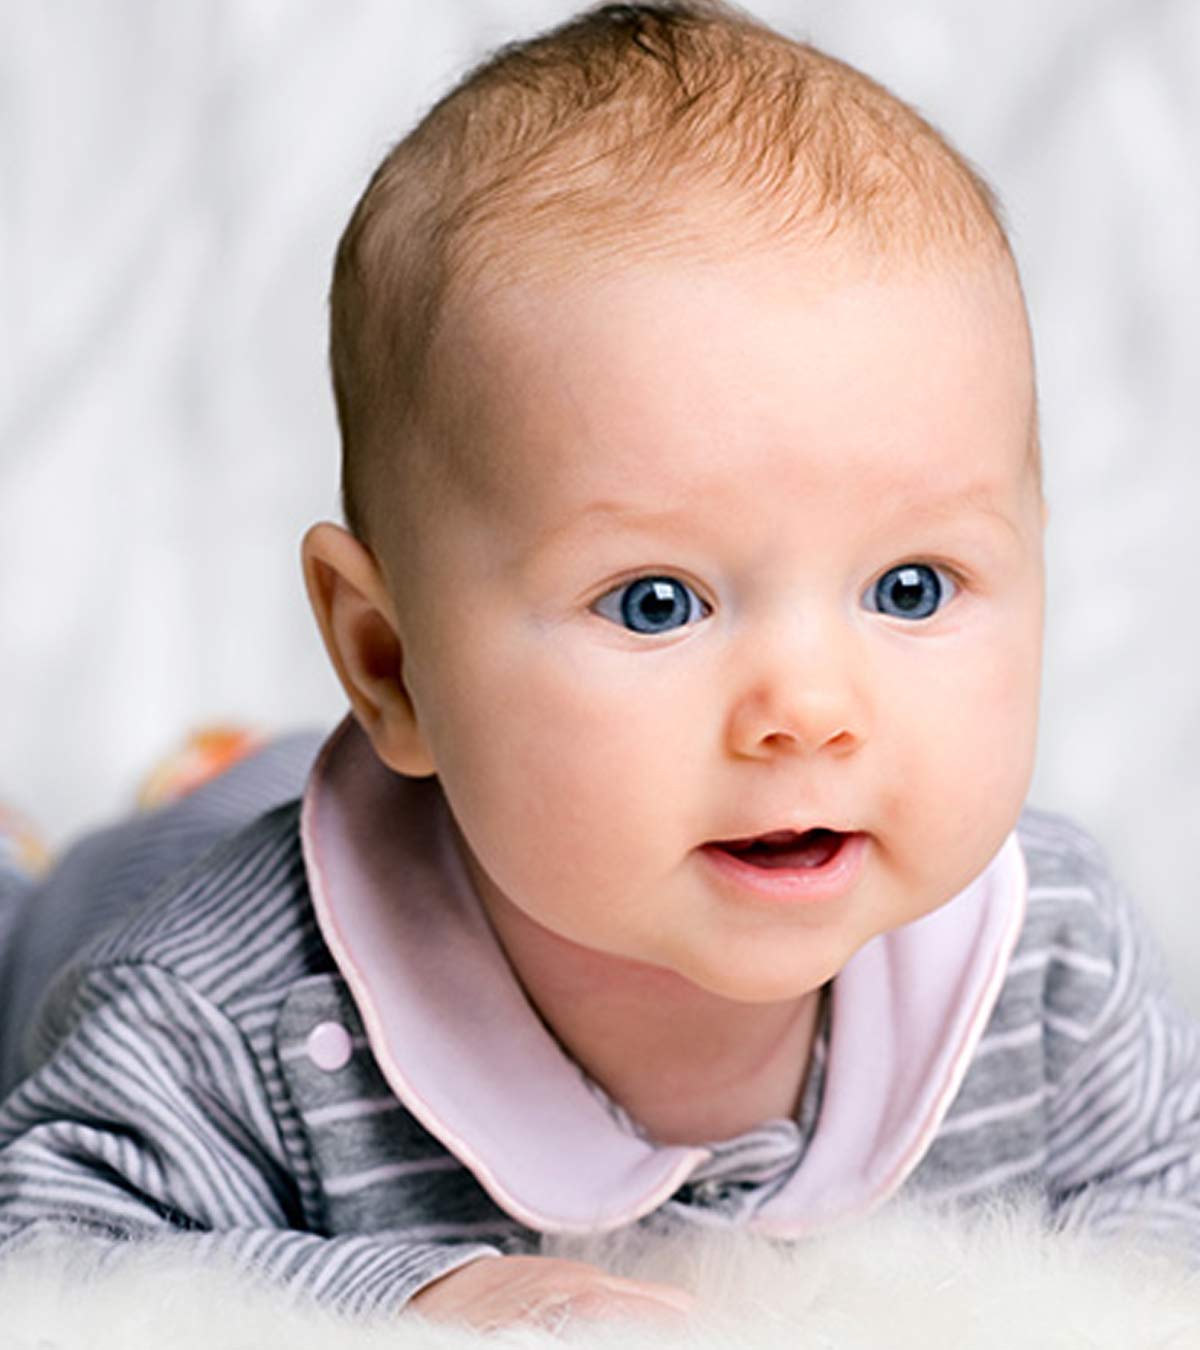 3-Month-Old Baby's Developmental Milestones & Tips To Support